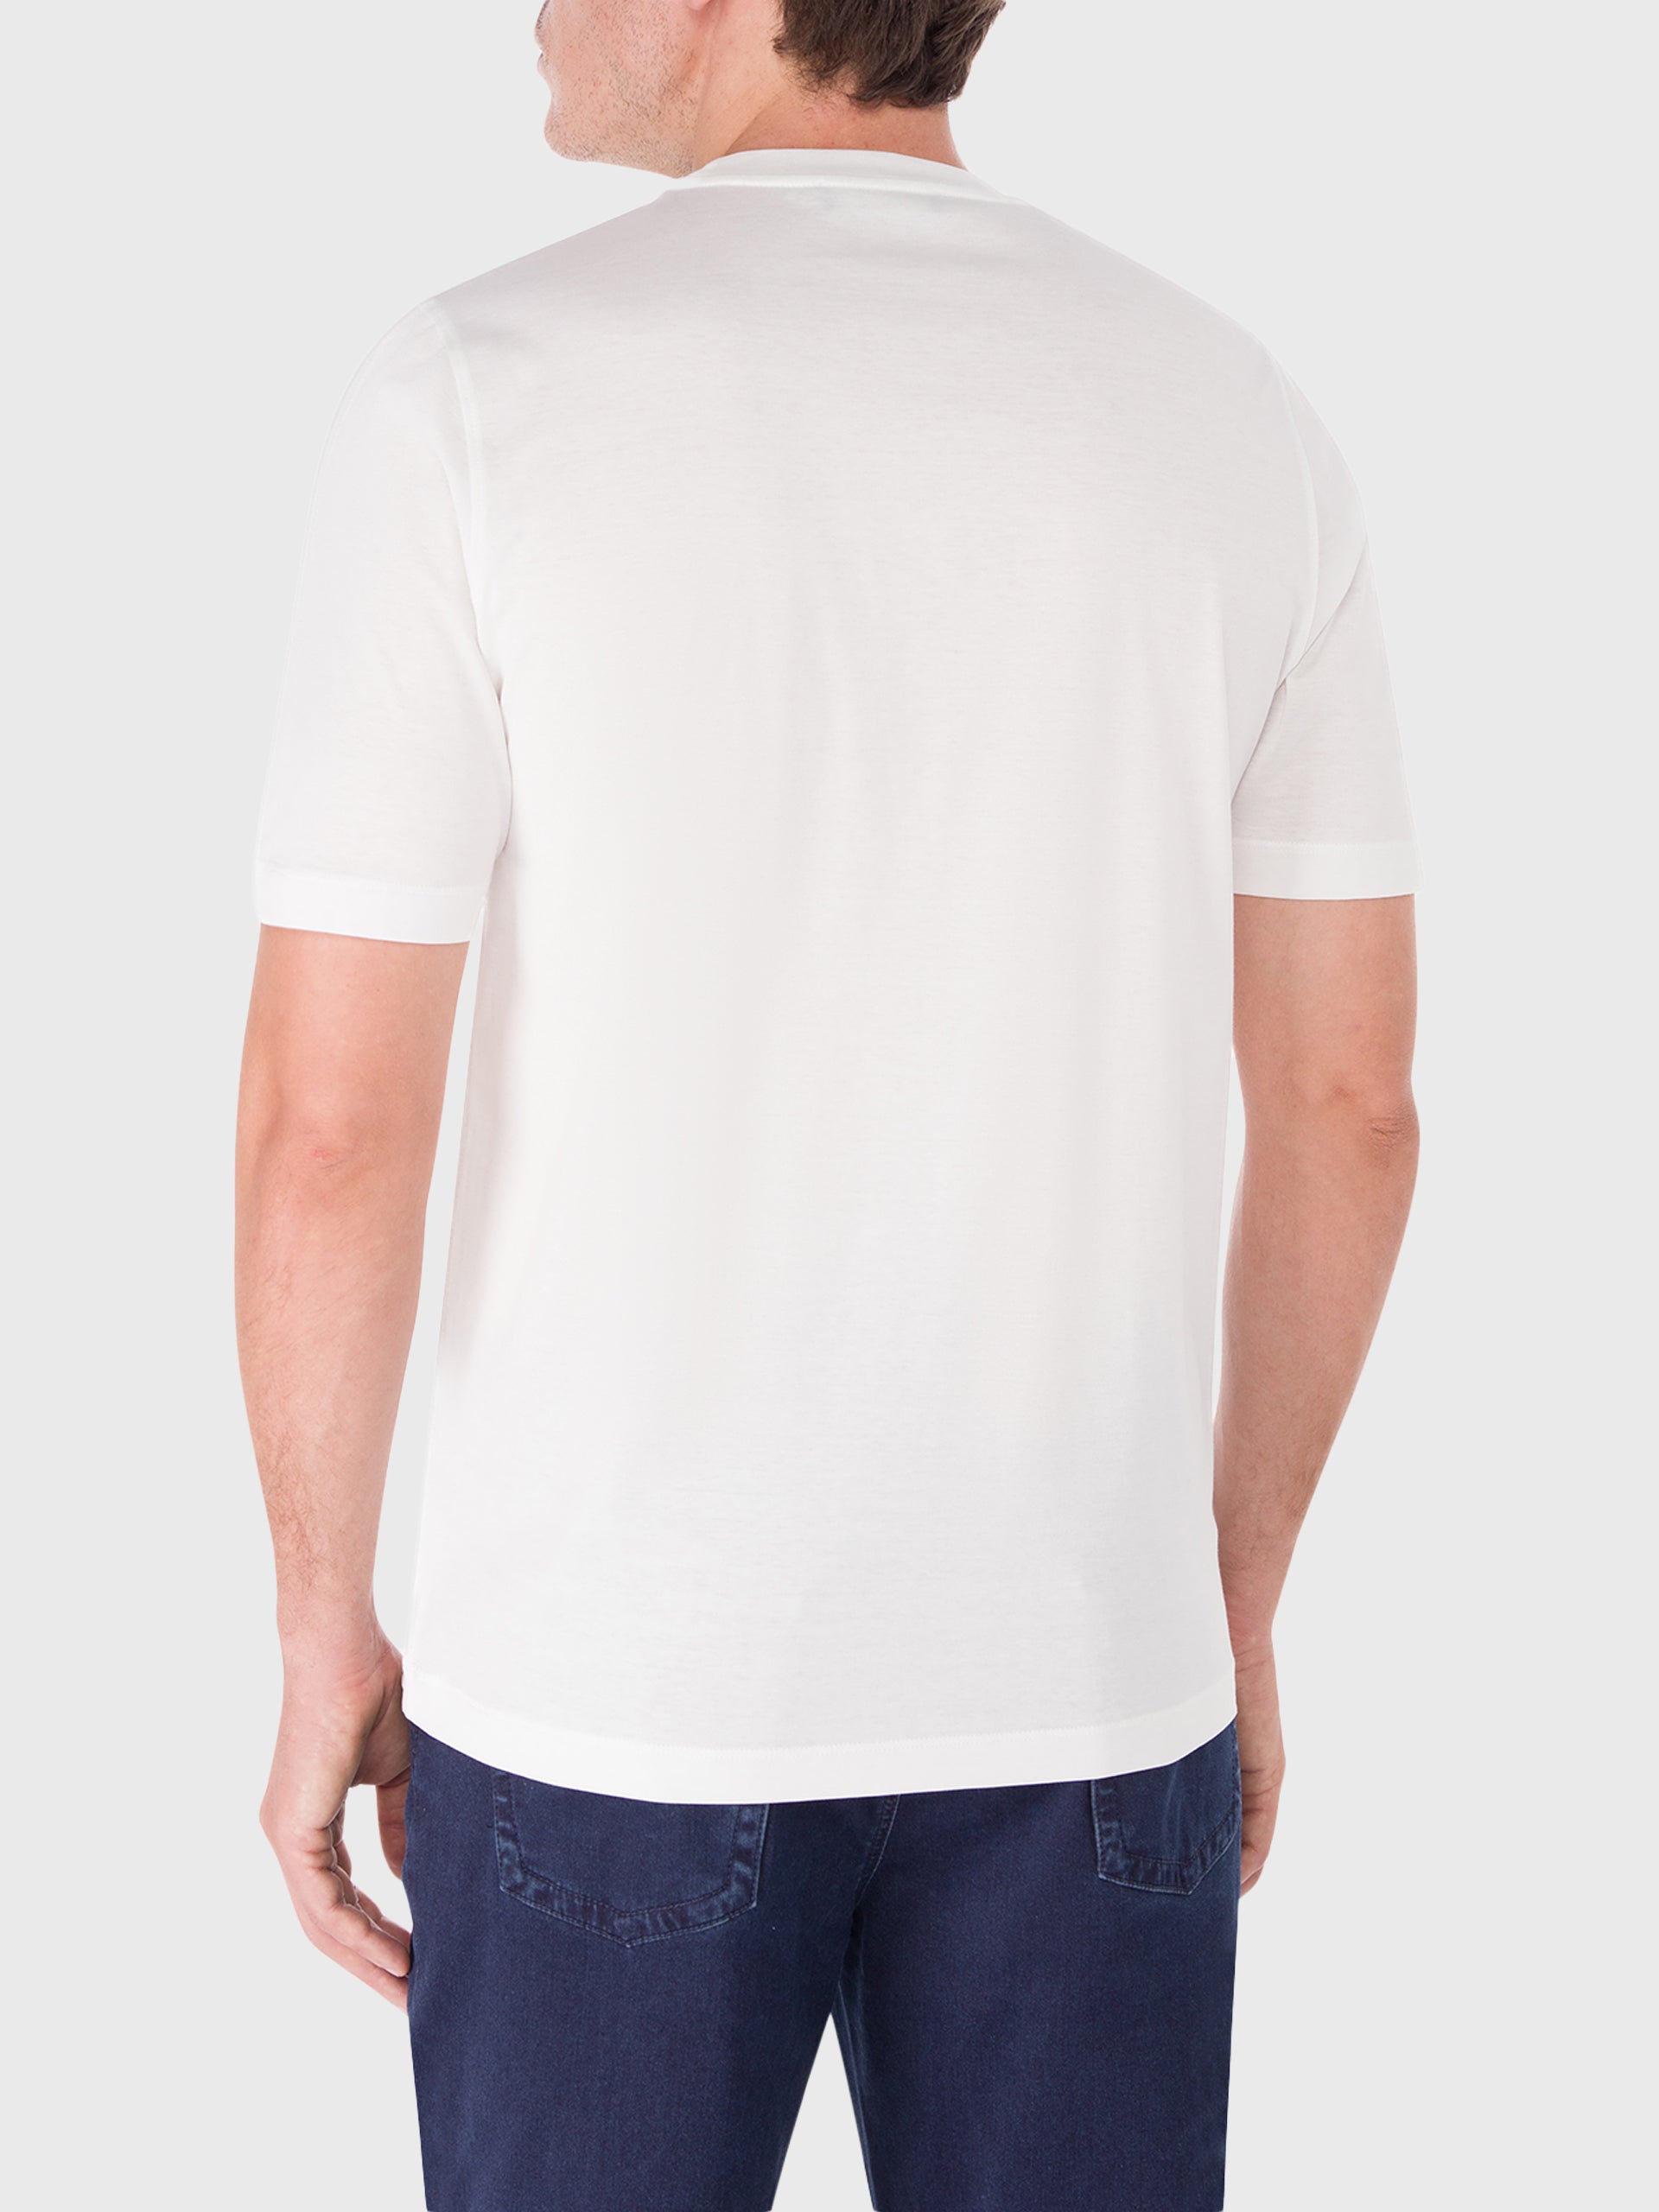 Cotton Round Neck T-Shirt with Zilli Lettering Embroidery